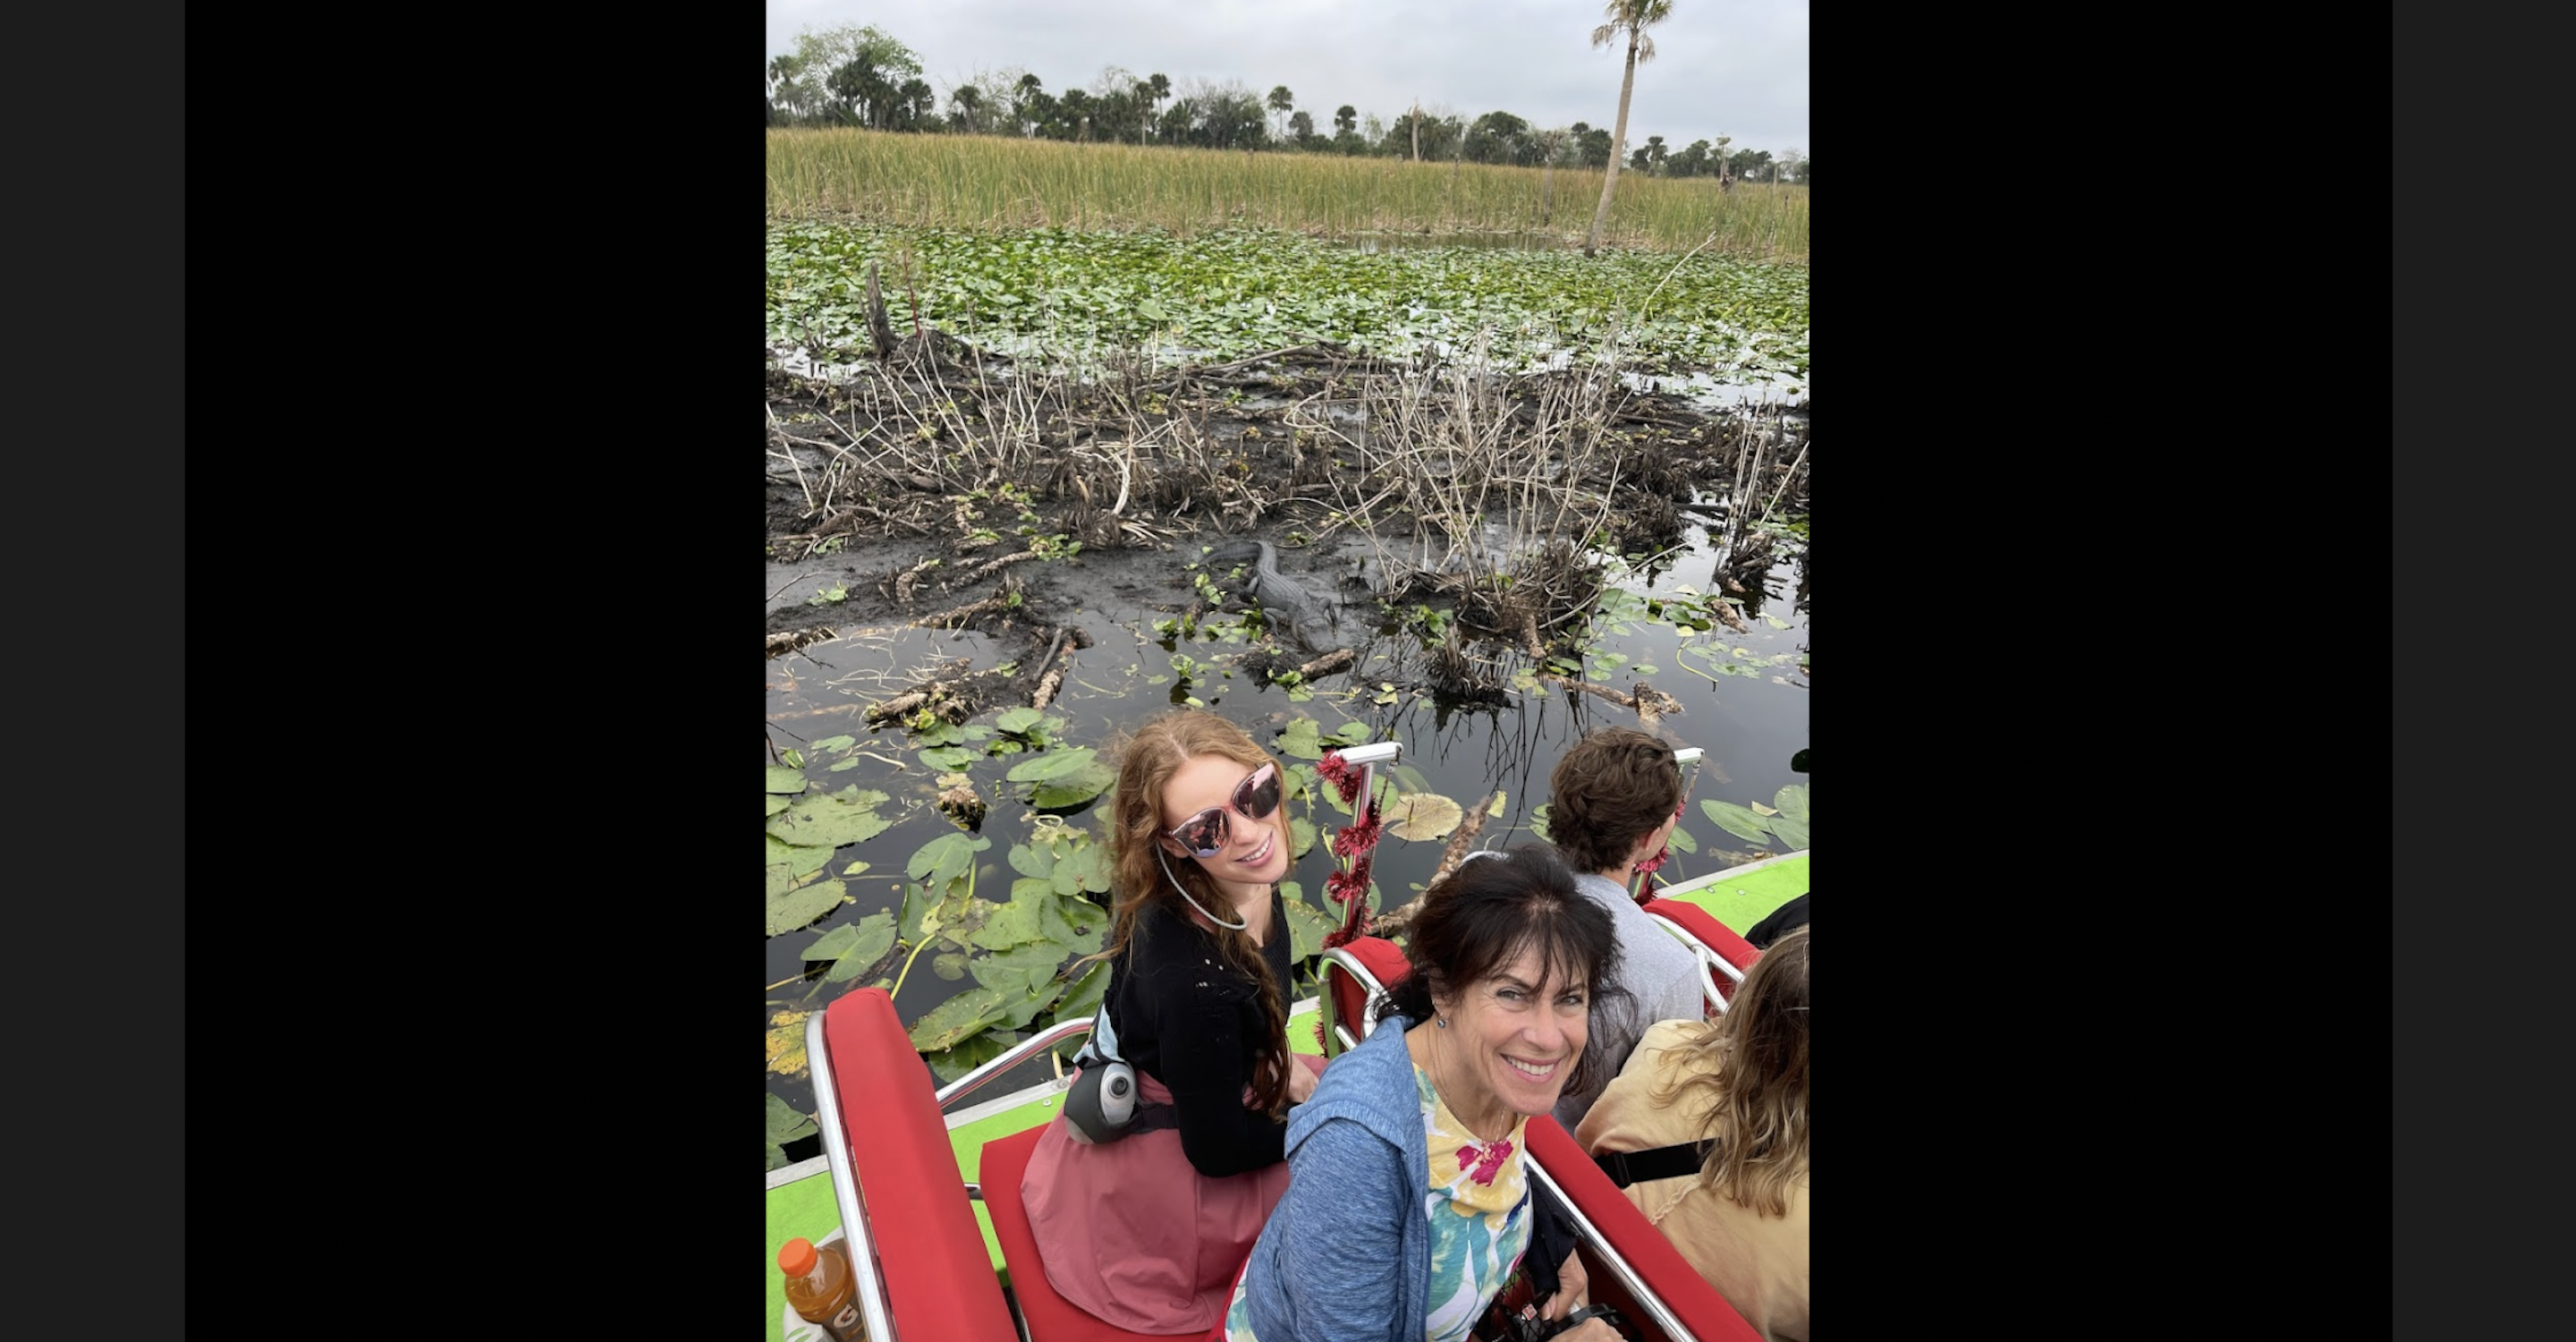 Spotted a gator aboard an airboat